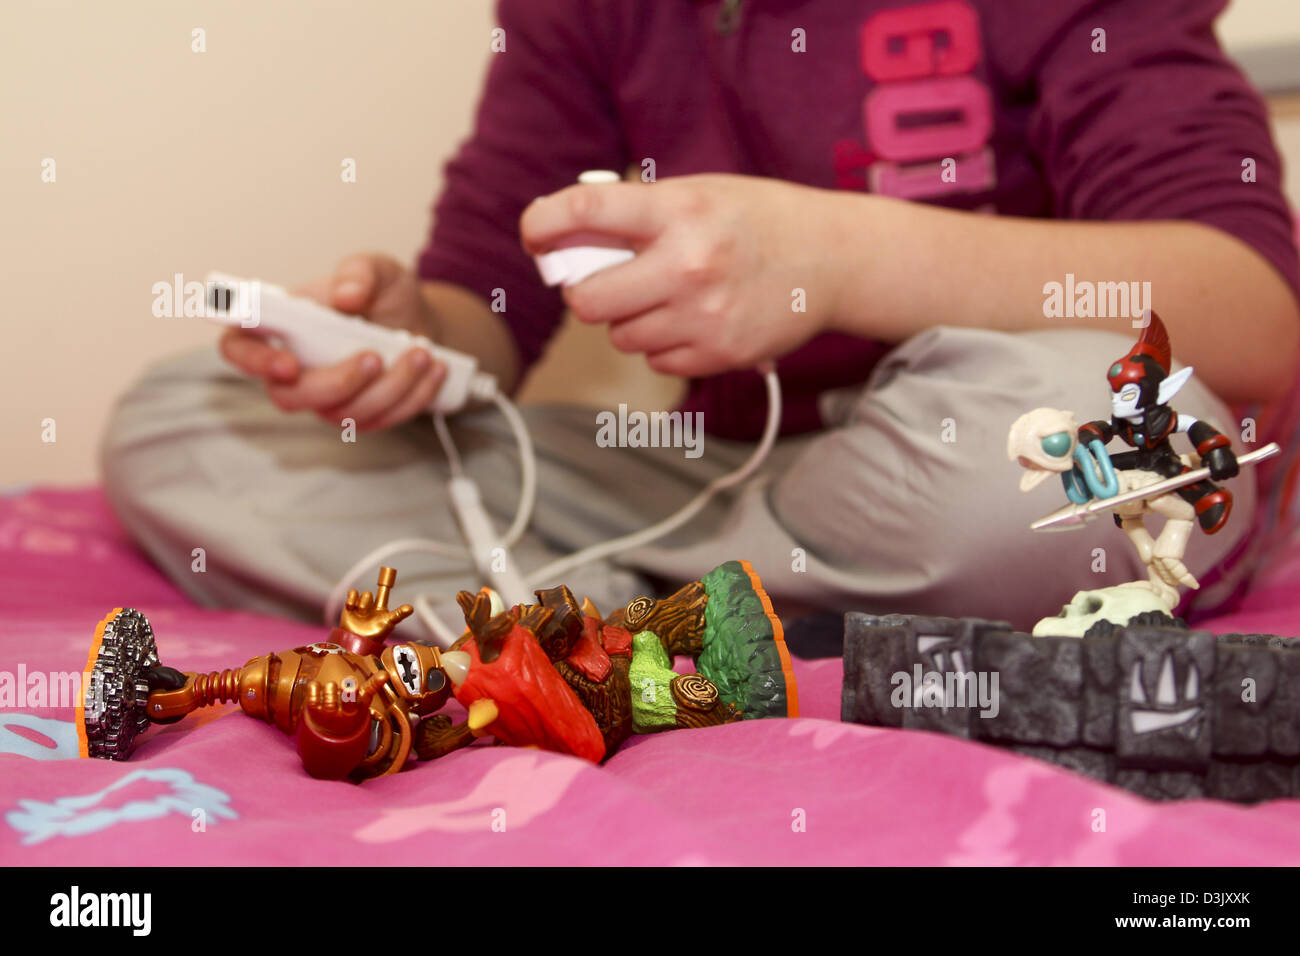 Young girl playing Skylanders video game on Nintendo Wii using portal and character figures Stock Photo